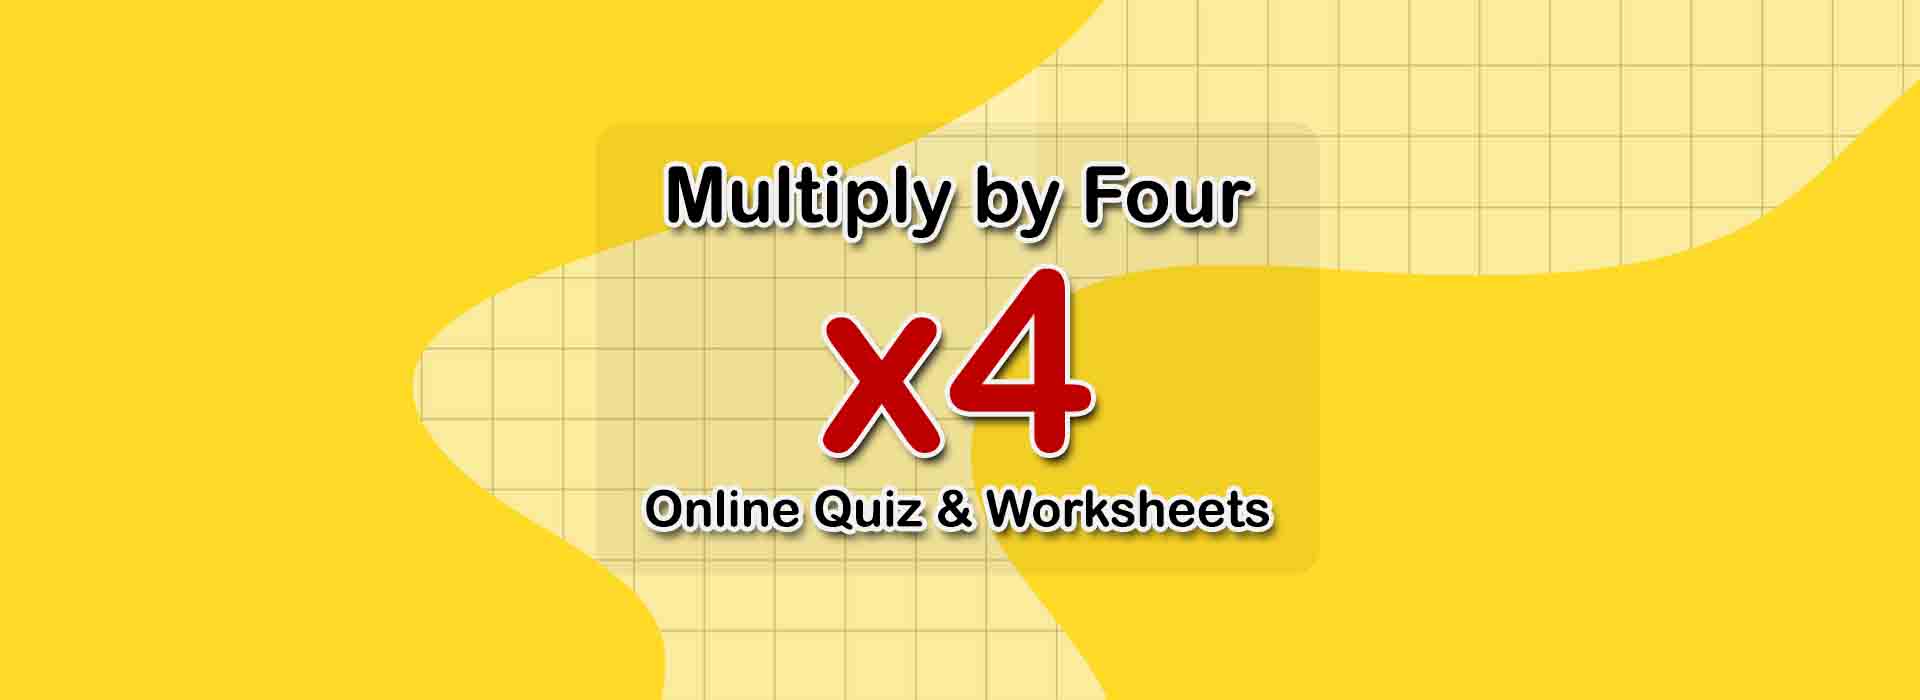 multiplication-tables-from-1-to-20-printable-pdf-table-design-ideas